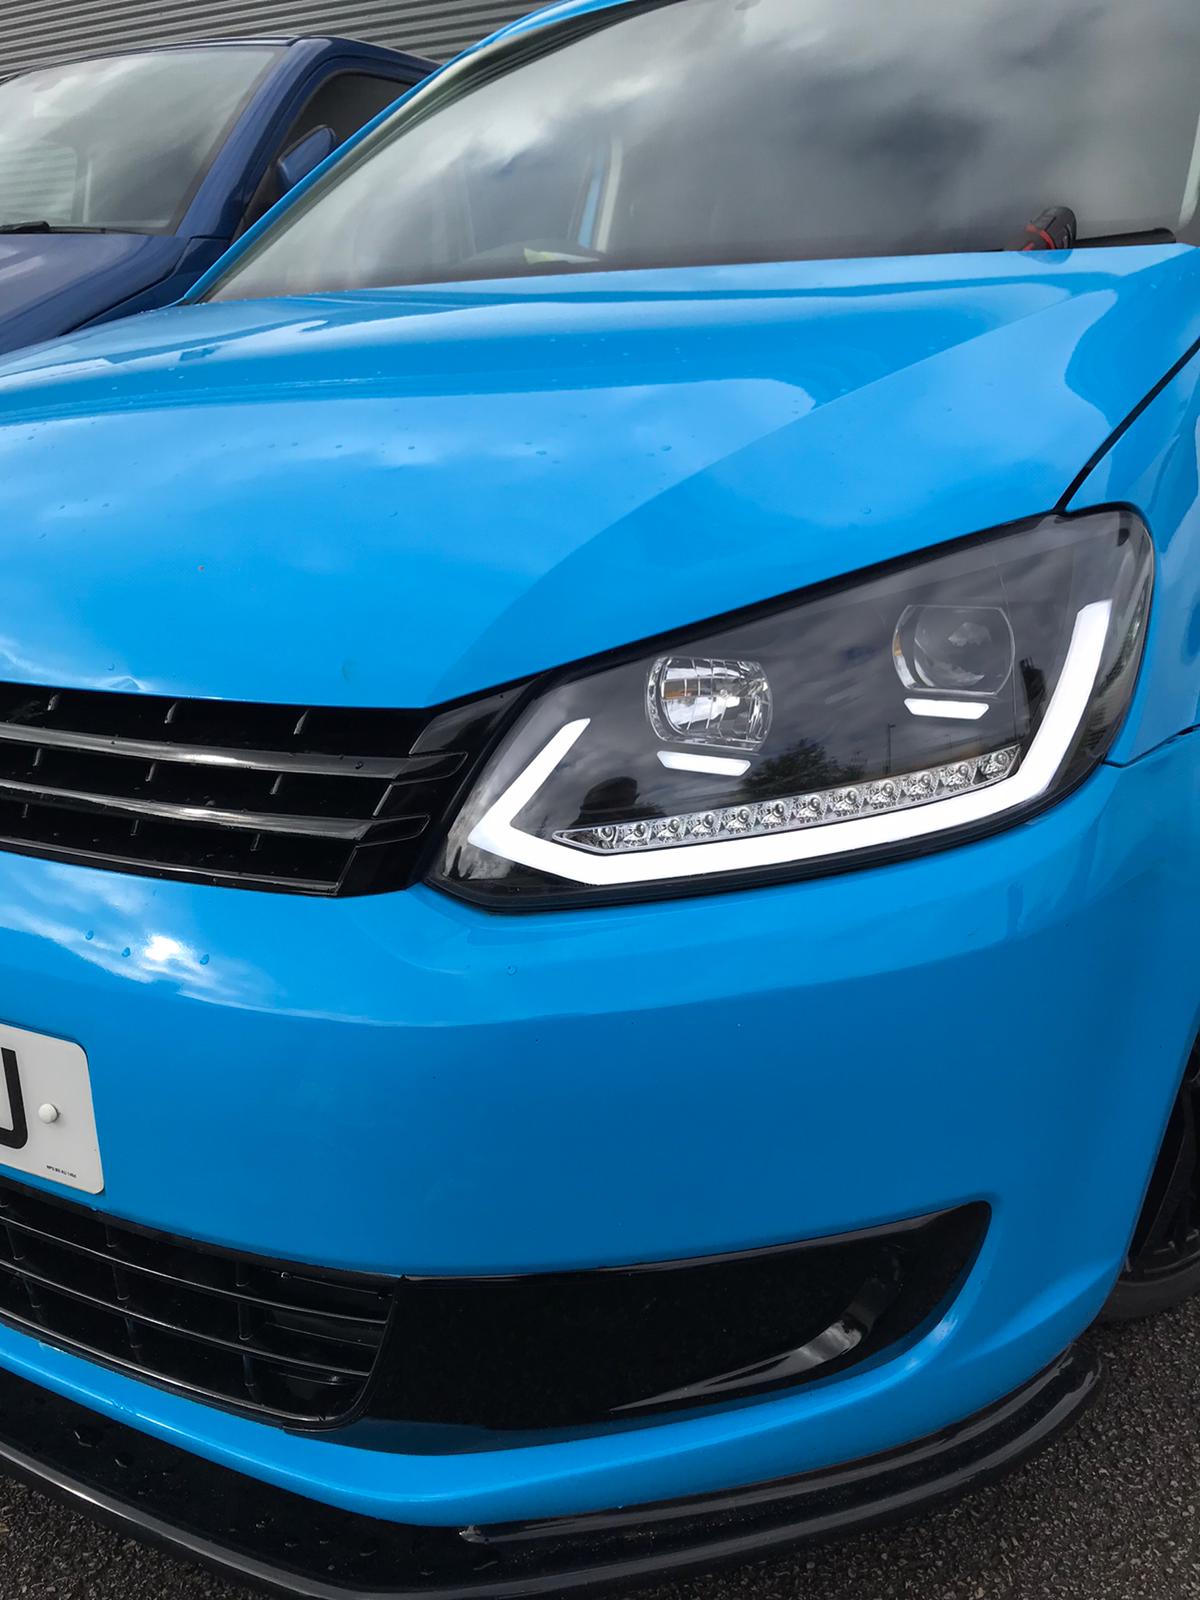 New Product coming soon VW Caddy DRL Headlights